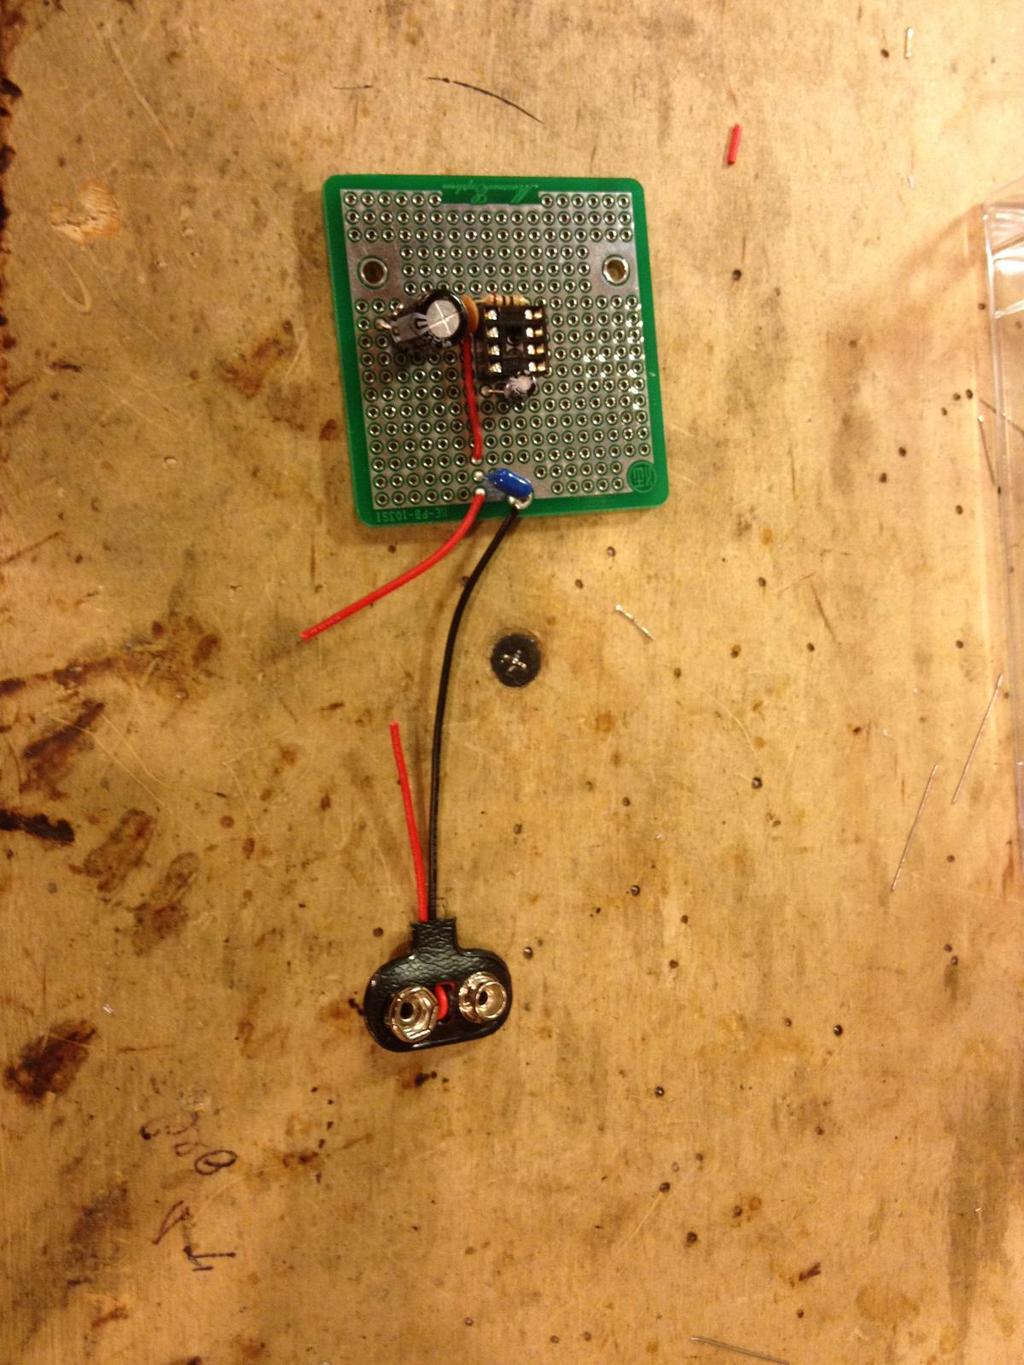 Step 8b - Topside of 9V Clip Cut the red wire,